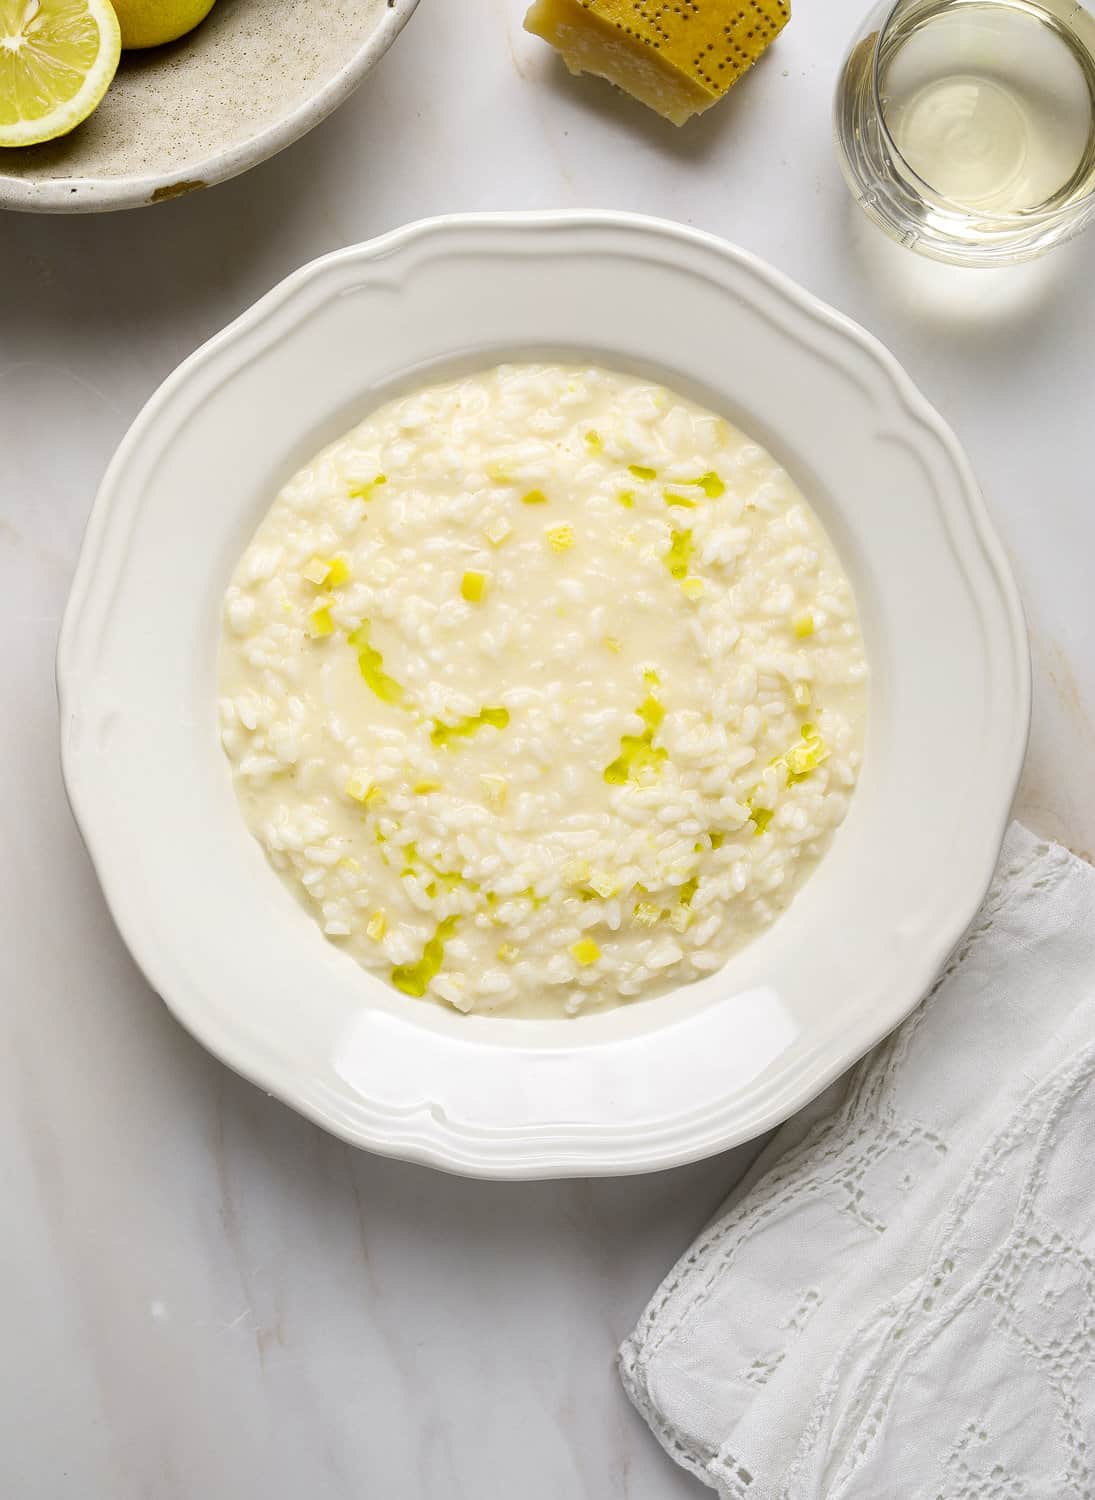 A white bowl filled with creamy risotto on a marble tabletop with white lace napkins and a glass of white wine.